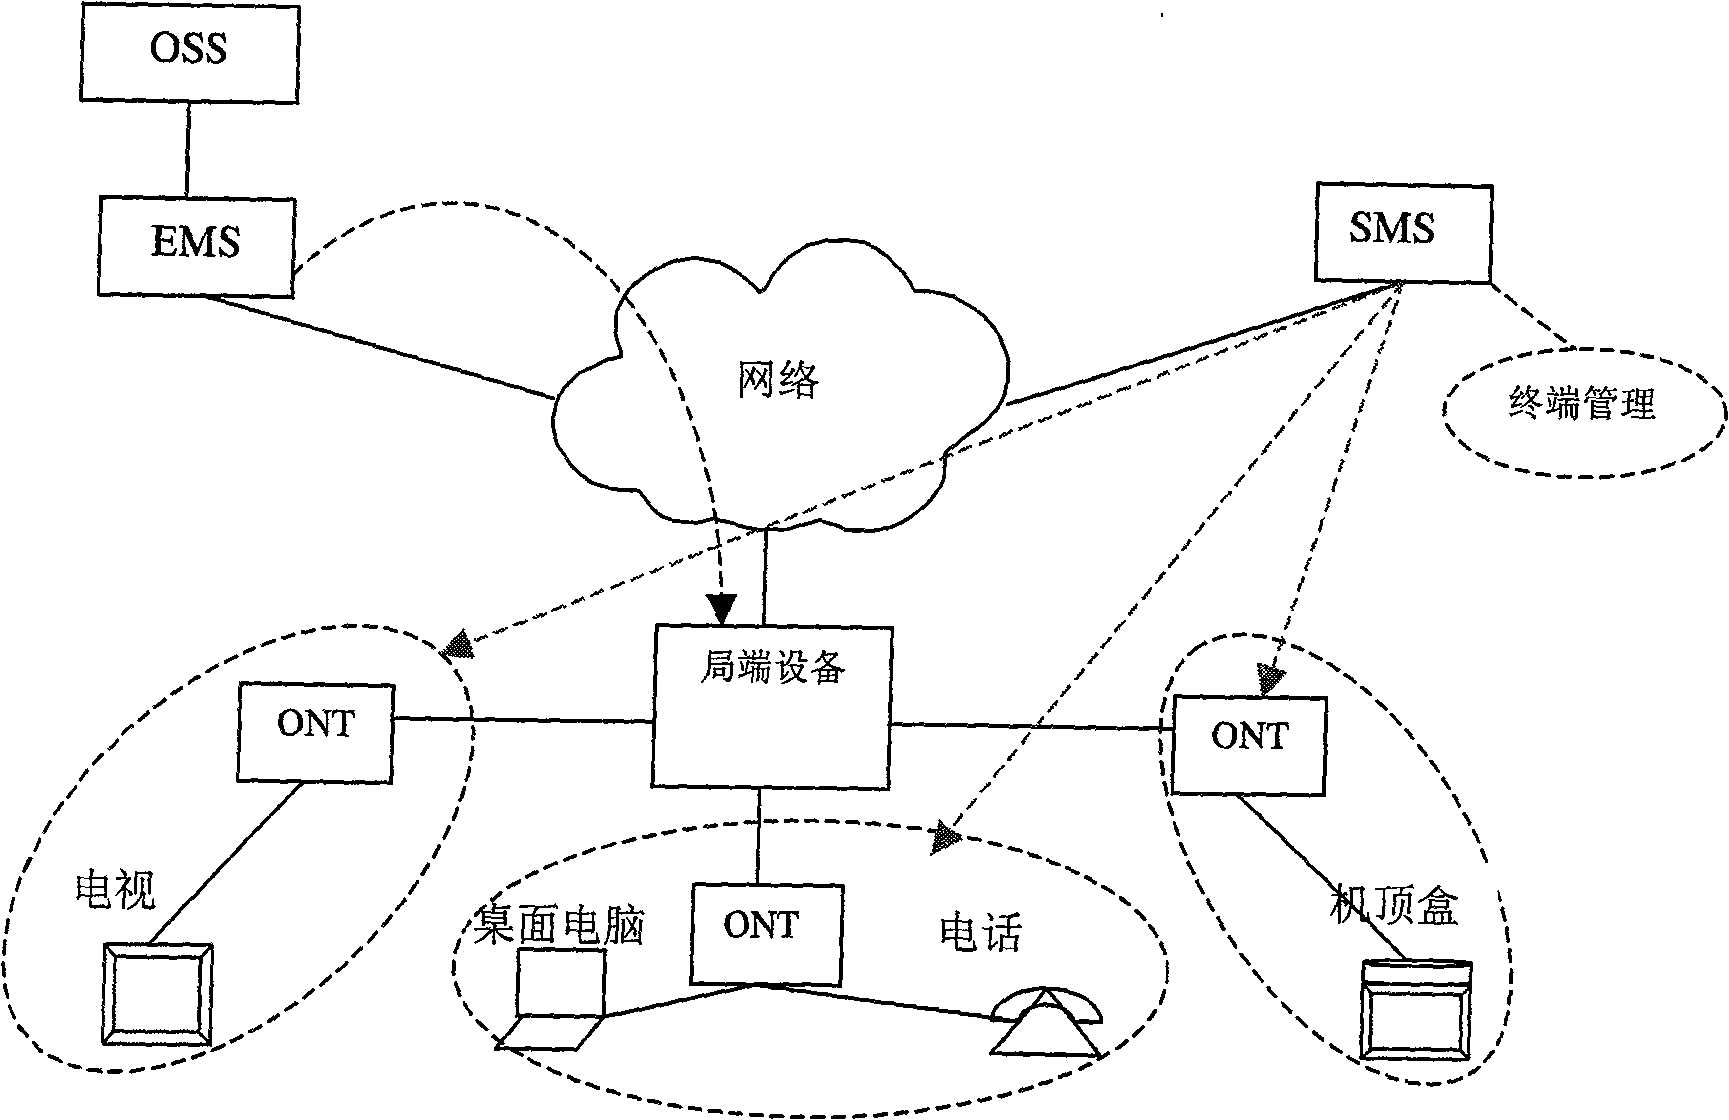 Method for realizing separation of communication network and terminal service with network